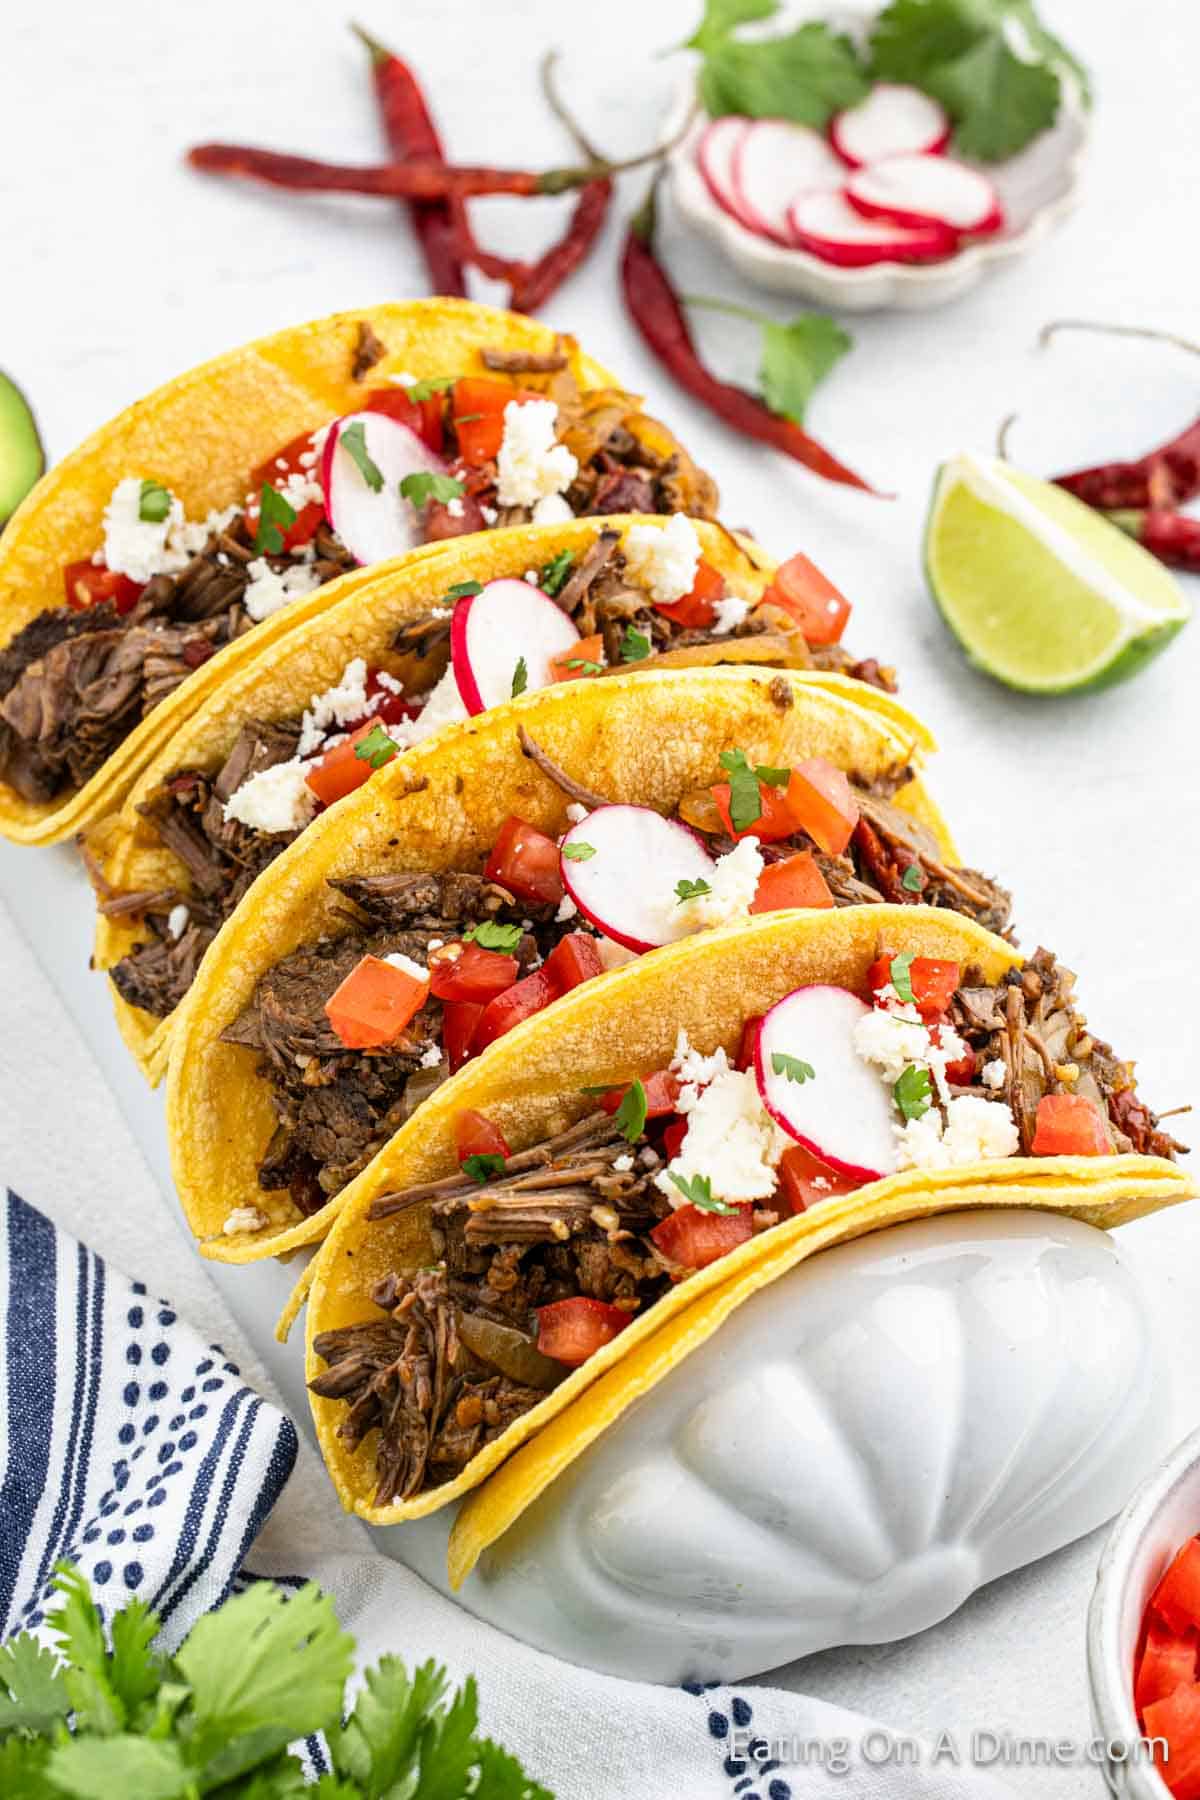 Shredded beef in corn tortillas in a taco stand topped with diced tomatoes and slice radishes